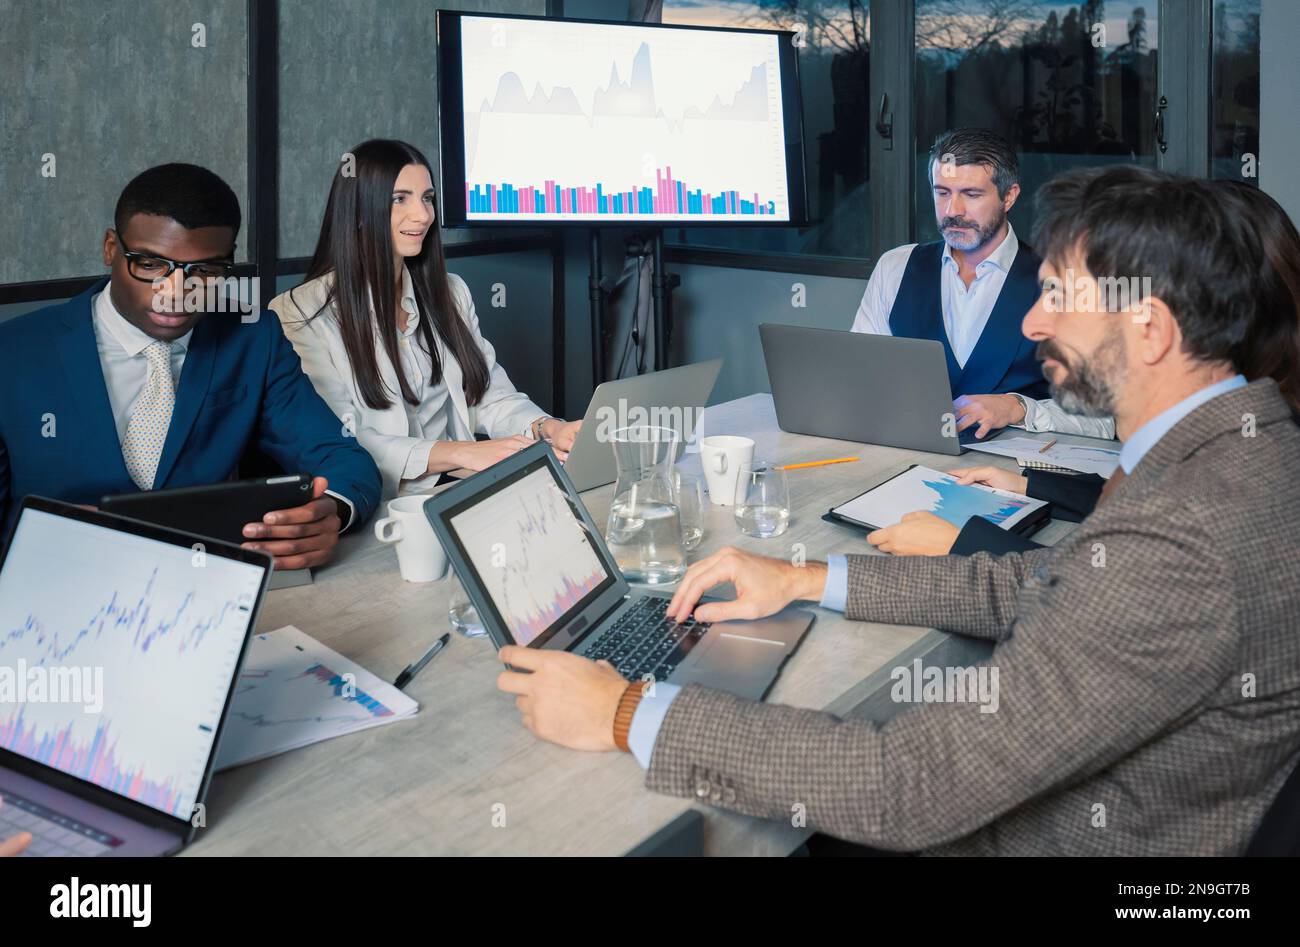 Young Smiling Business People on Meeting in Office. Group of Young Coworkers Sitting Together at Table in Modern Office. Business Team Working Togethe Stock Photo